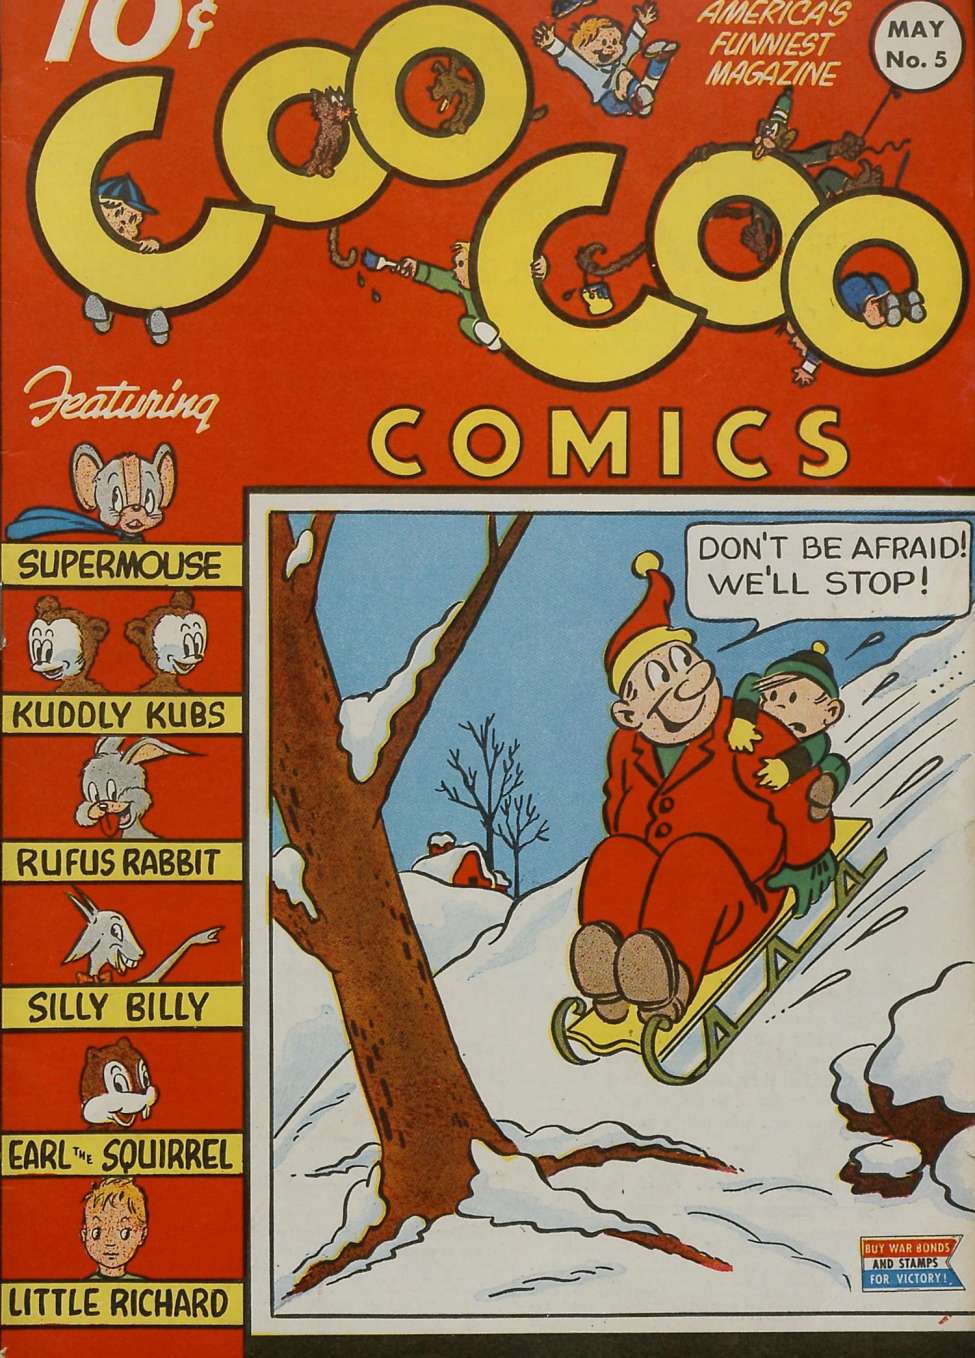 Book Cover For Coo Coo Comics 5